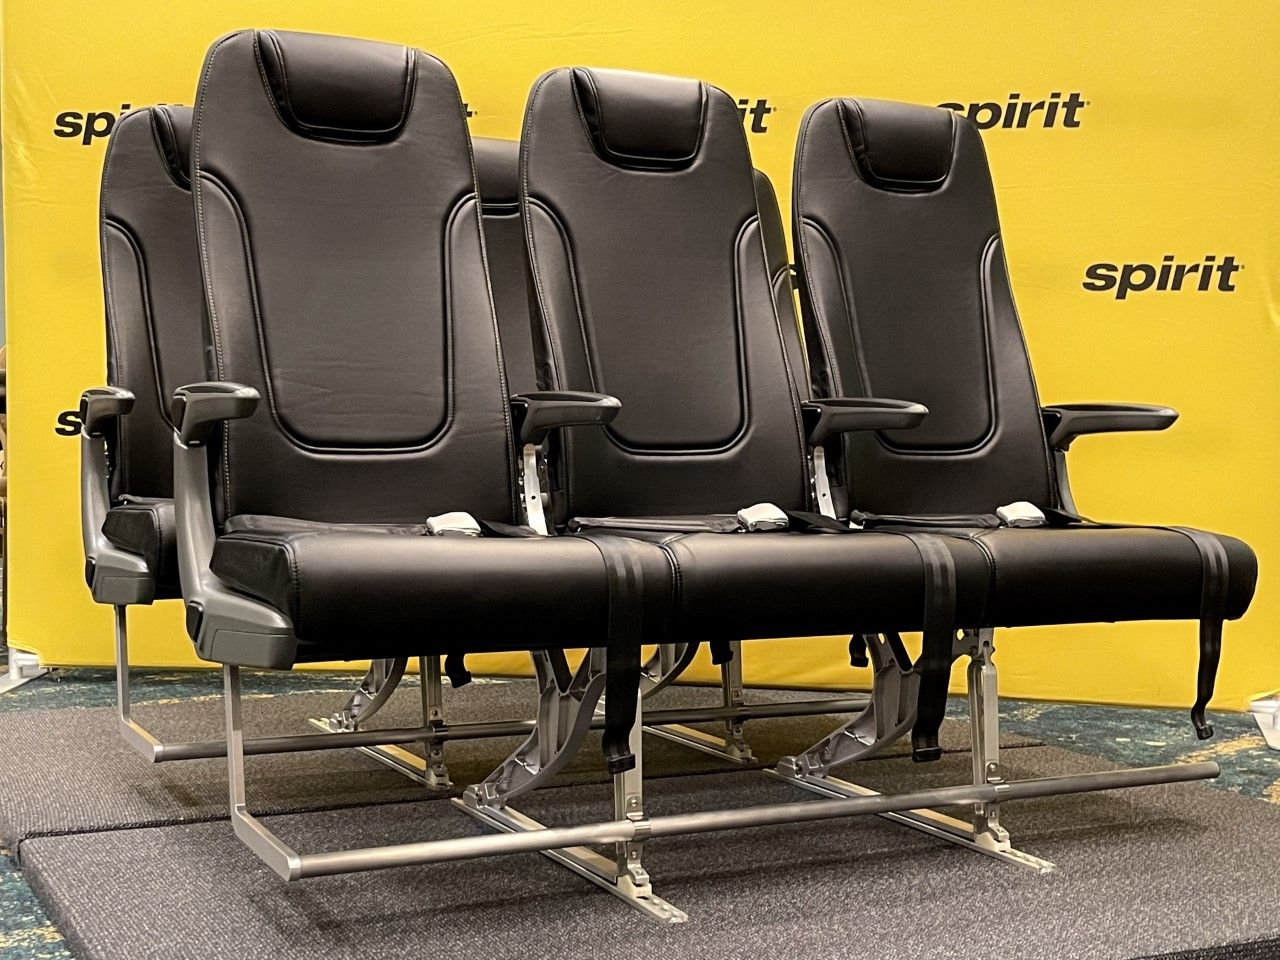 HAECO Cabin Solutions provides Spirit Airlines with Vector Seating for A320neo Family aircraft_3.jpg